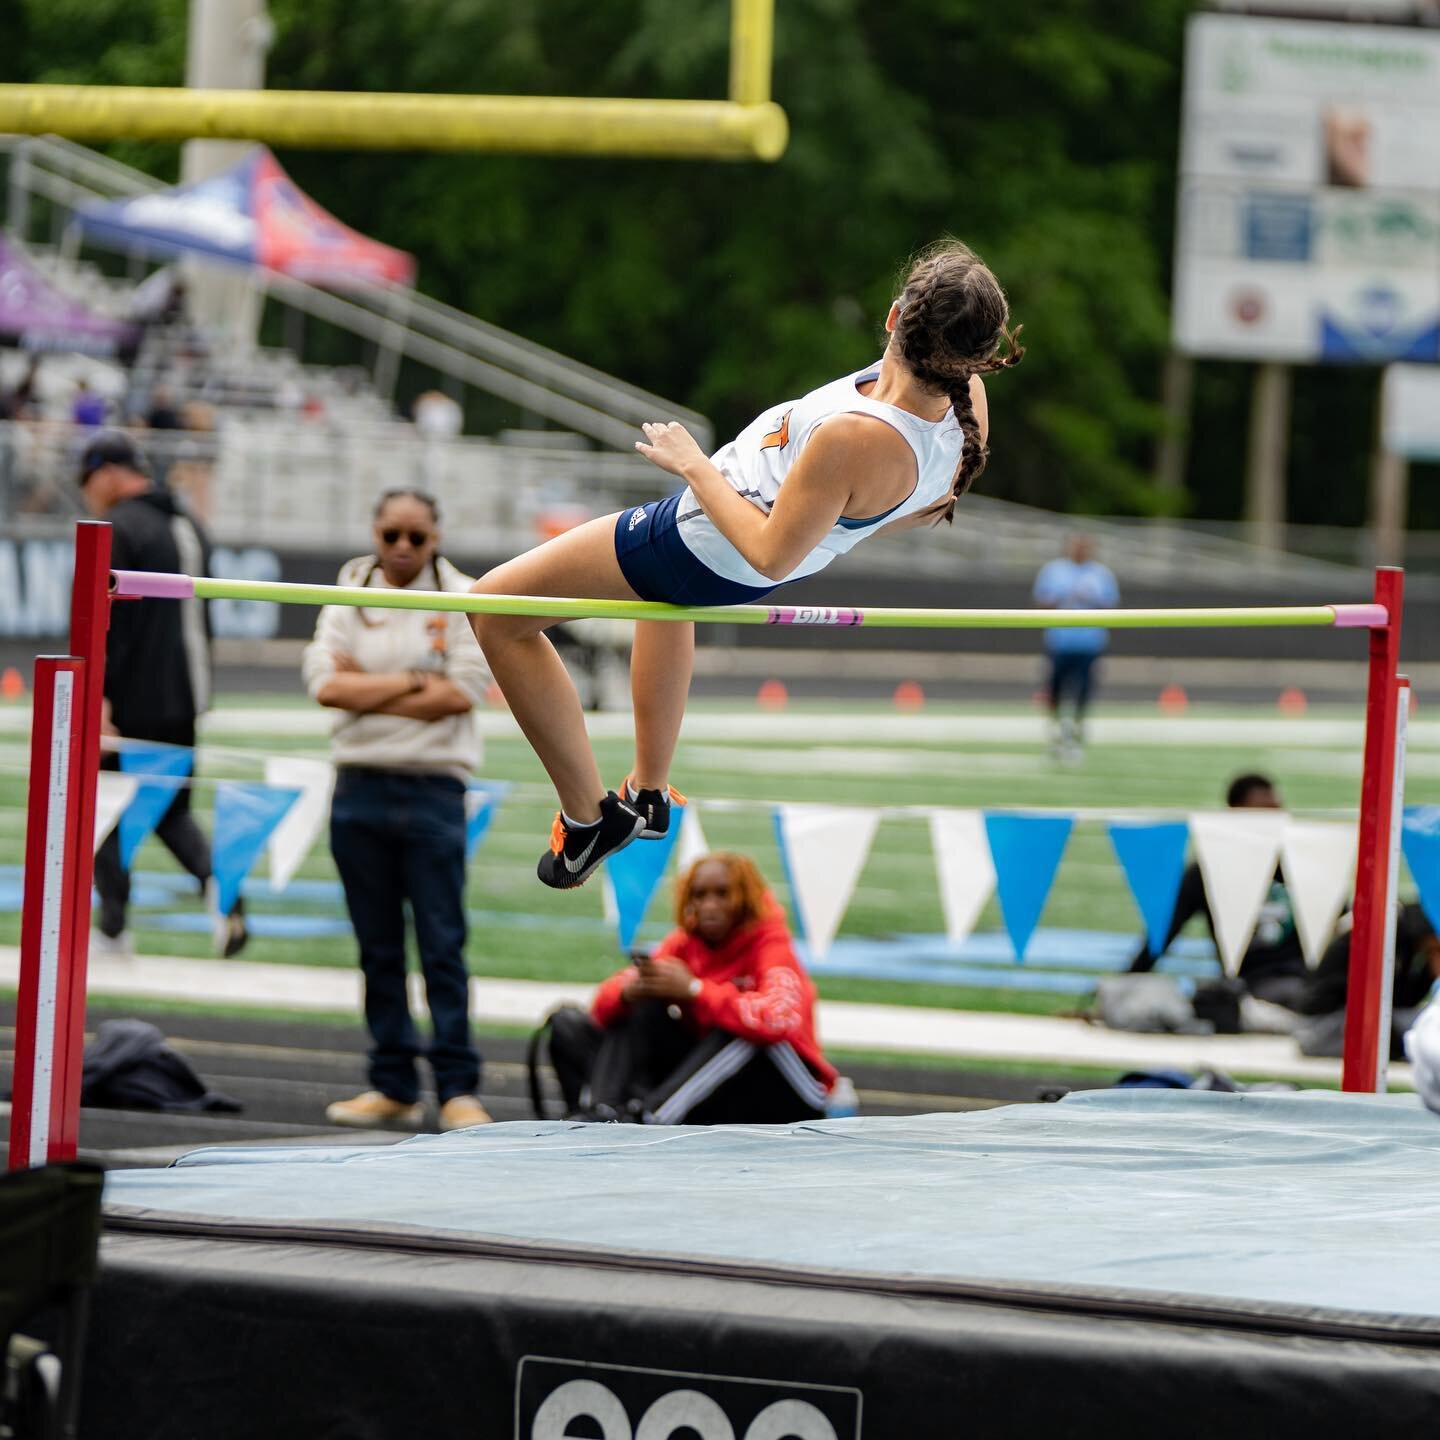 Aila Jo &amp; I spent a fun morning cheering on cousin Maddie as she qualified for State in High Jump. This was my first time watching Track and Field stuff and I was fascinated! Here&rsquo;s Maddie clearing 5&rsquo; to become one of the top 8 at thi